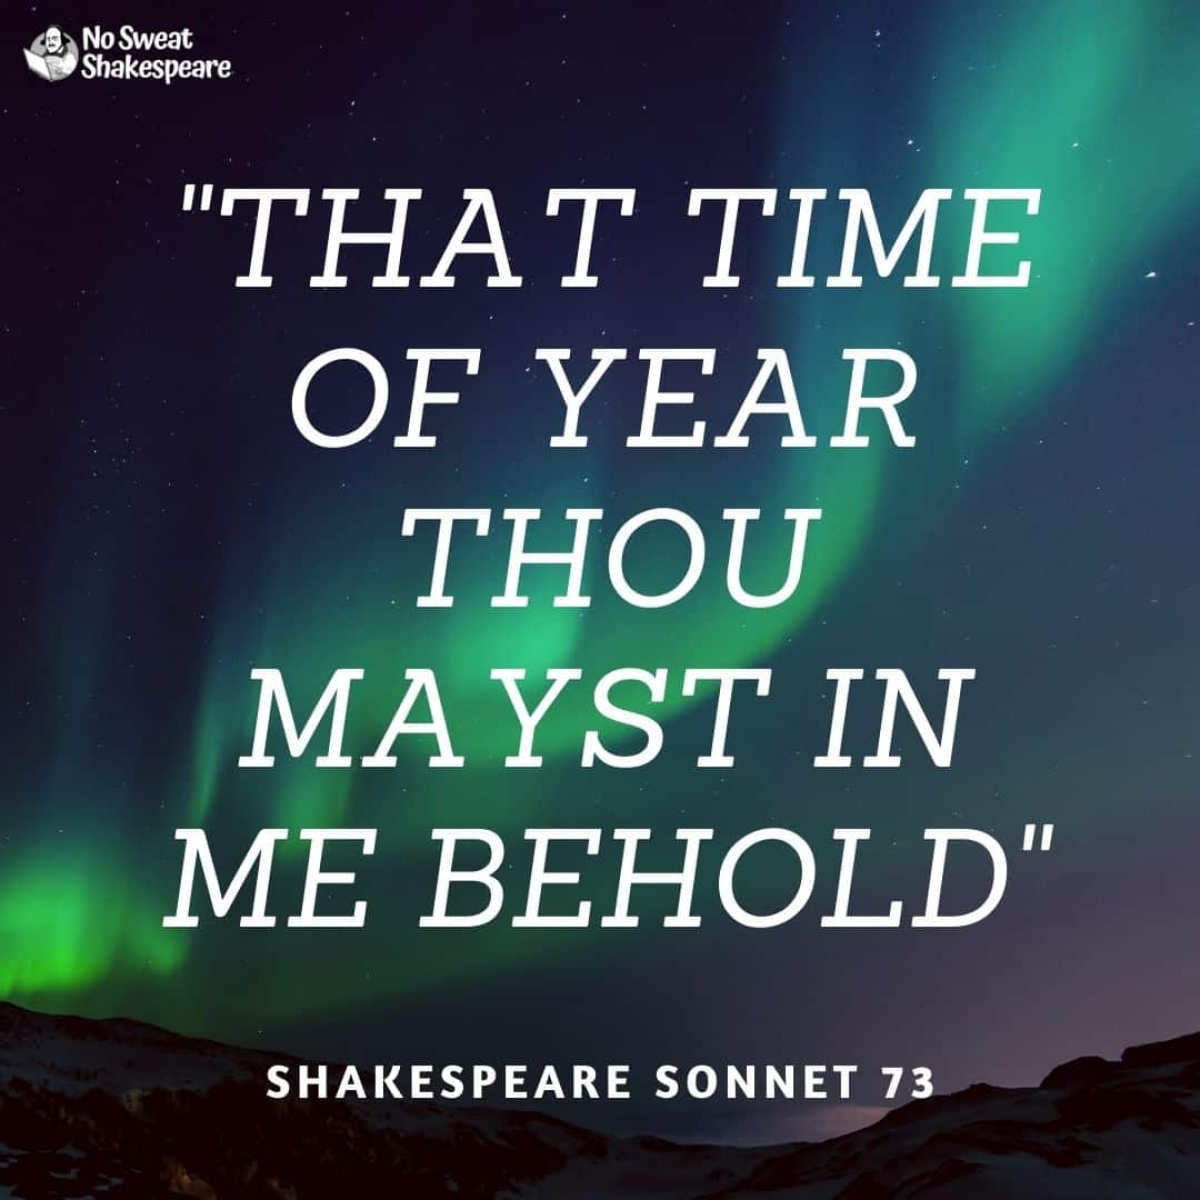 shakespeare that time of year thou mayst in me behold